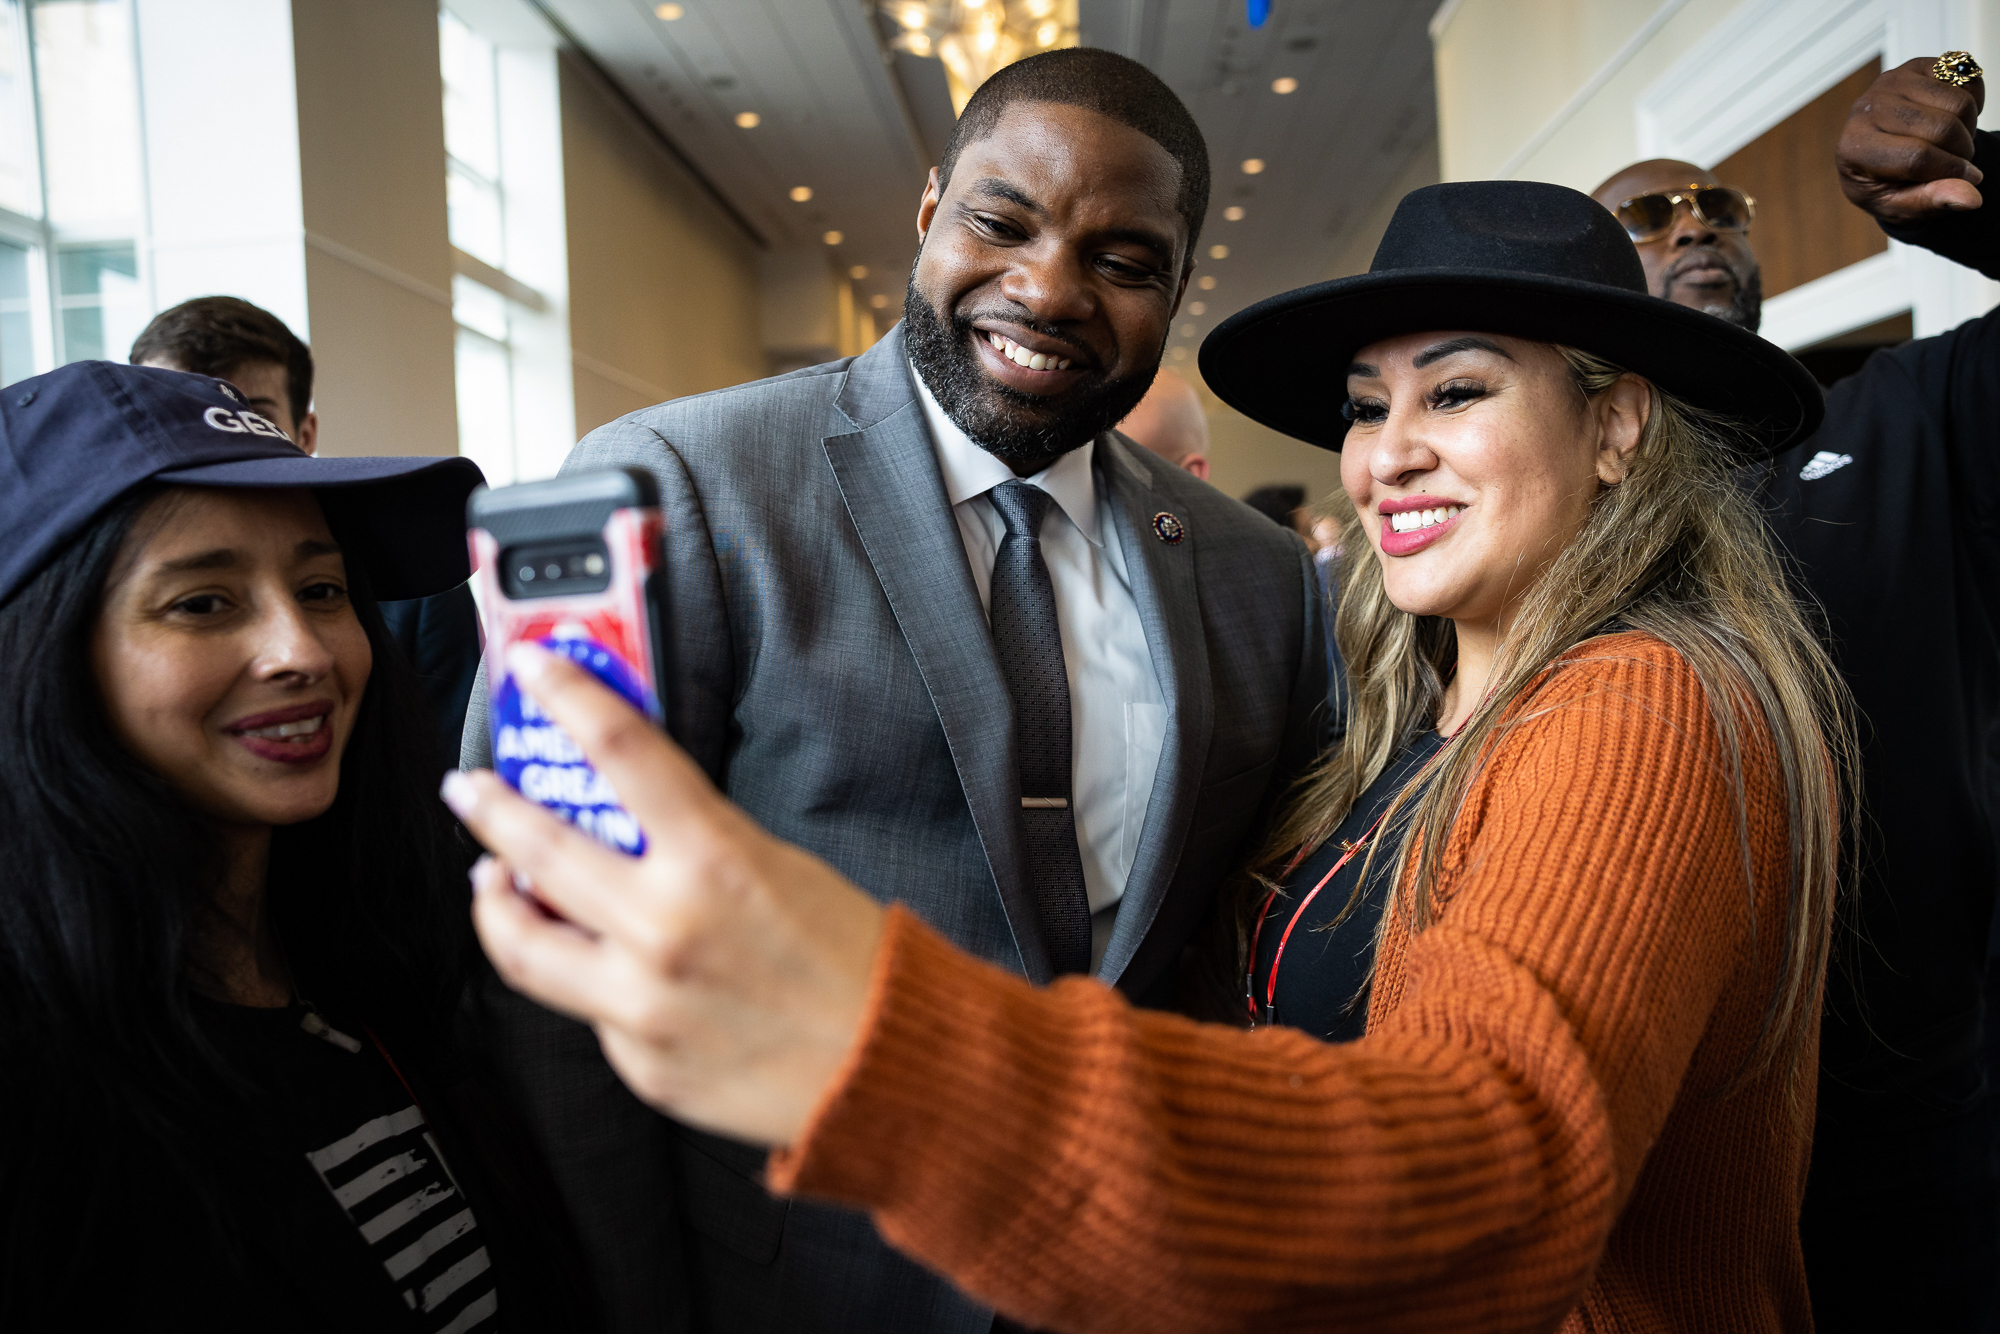 Attendees took selfies with some of their favorite special guests, among them Rep. Byron Donalds (R-Fla.).